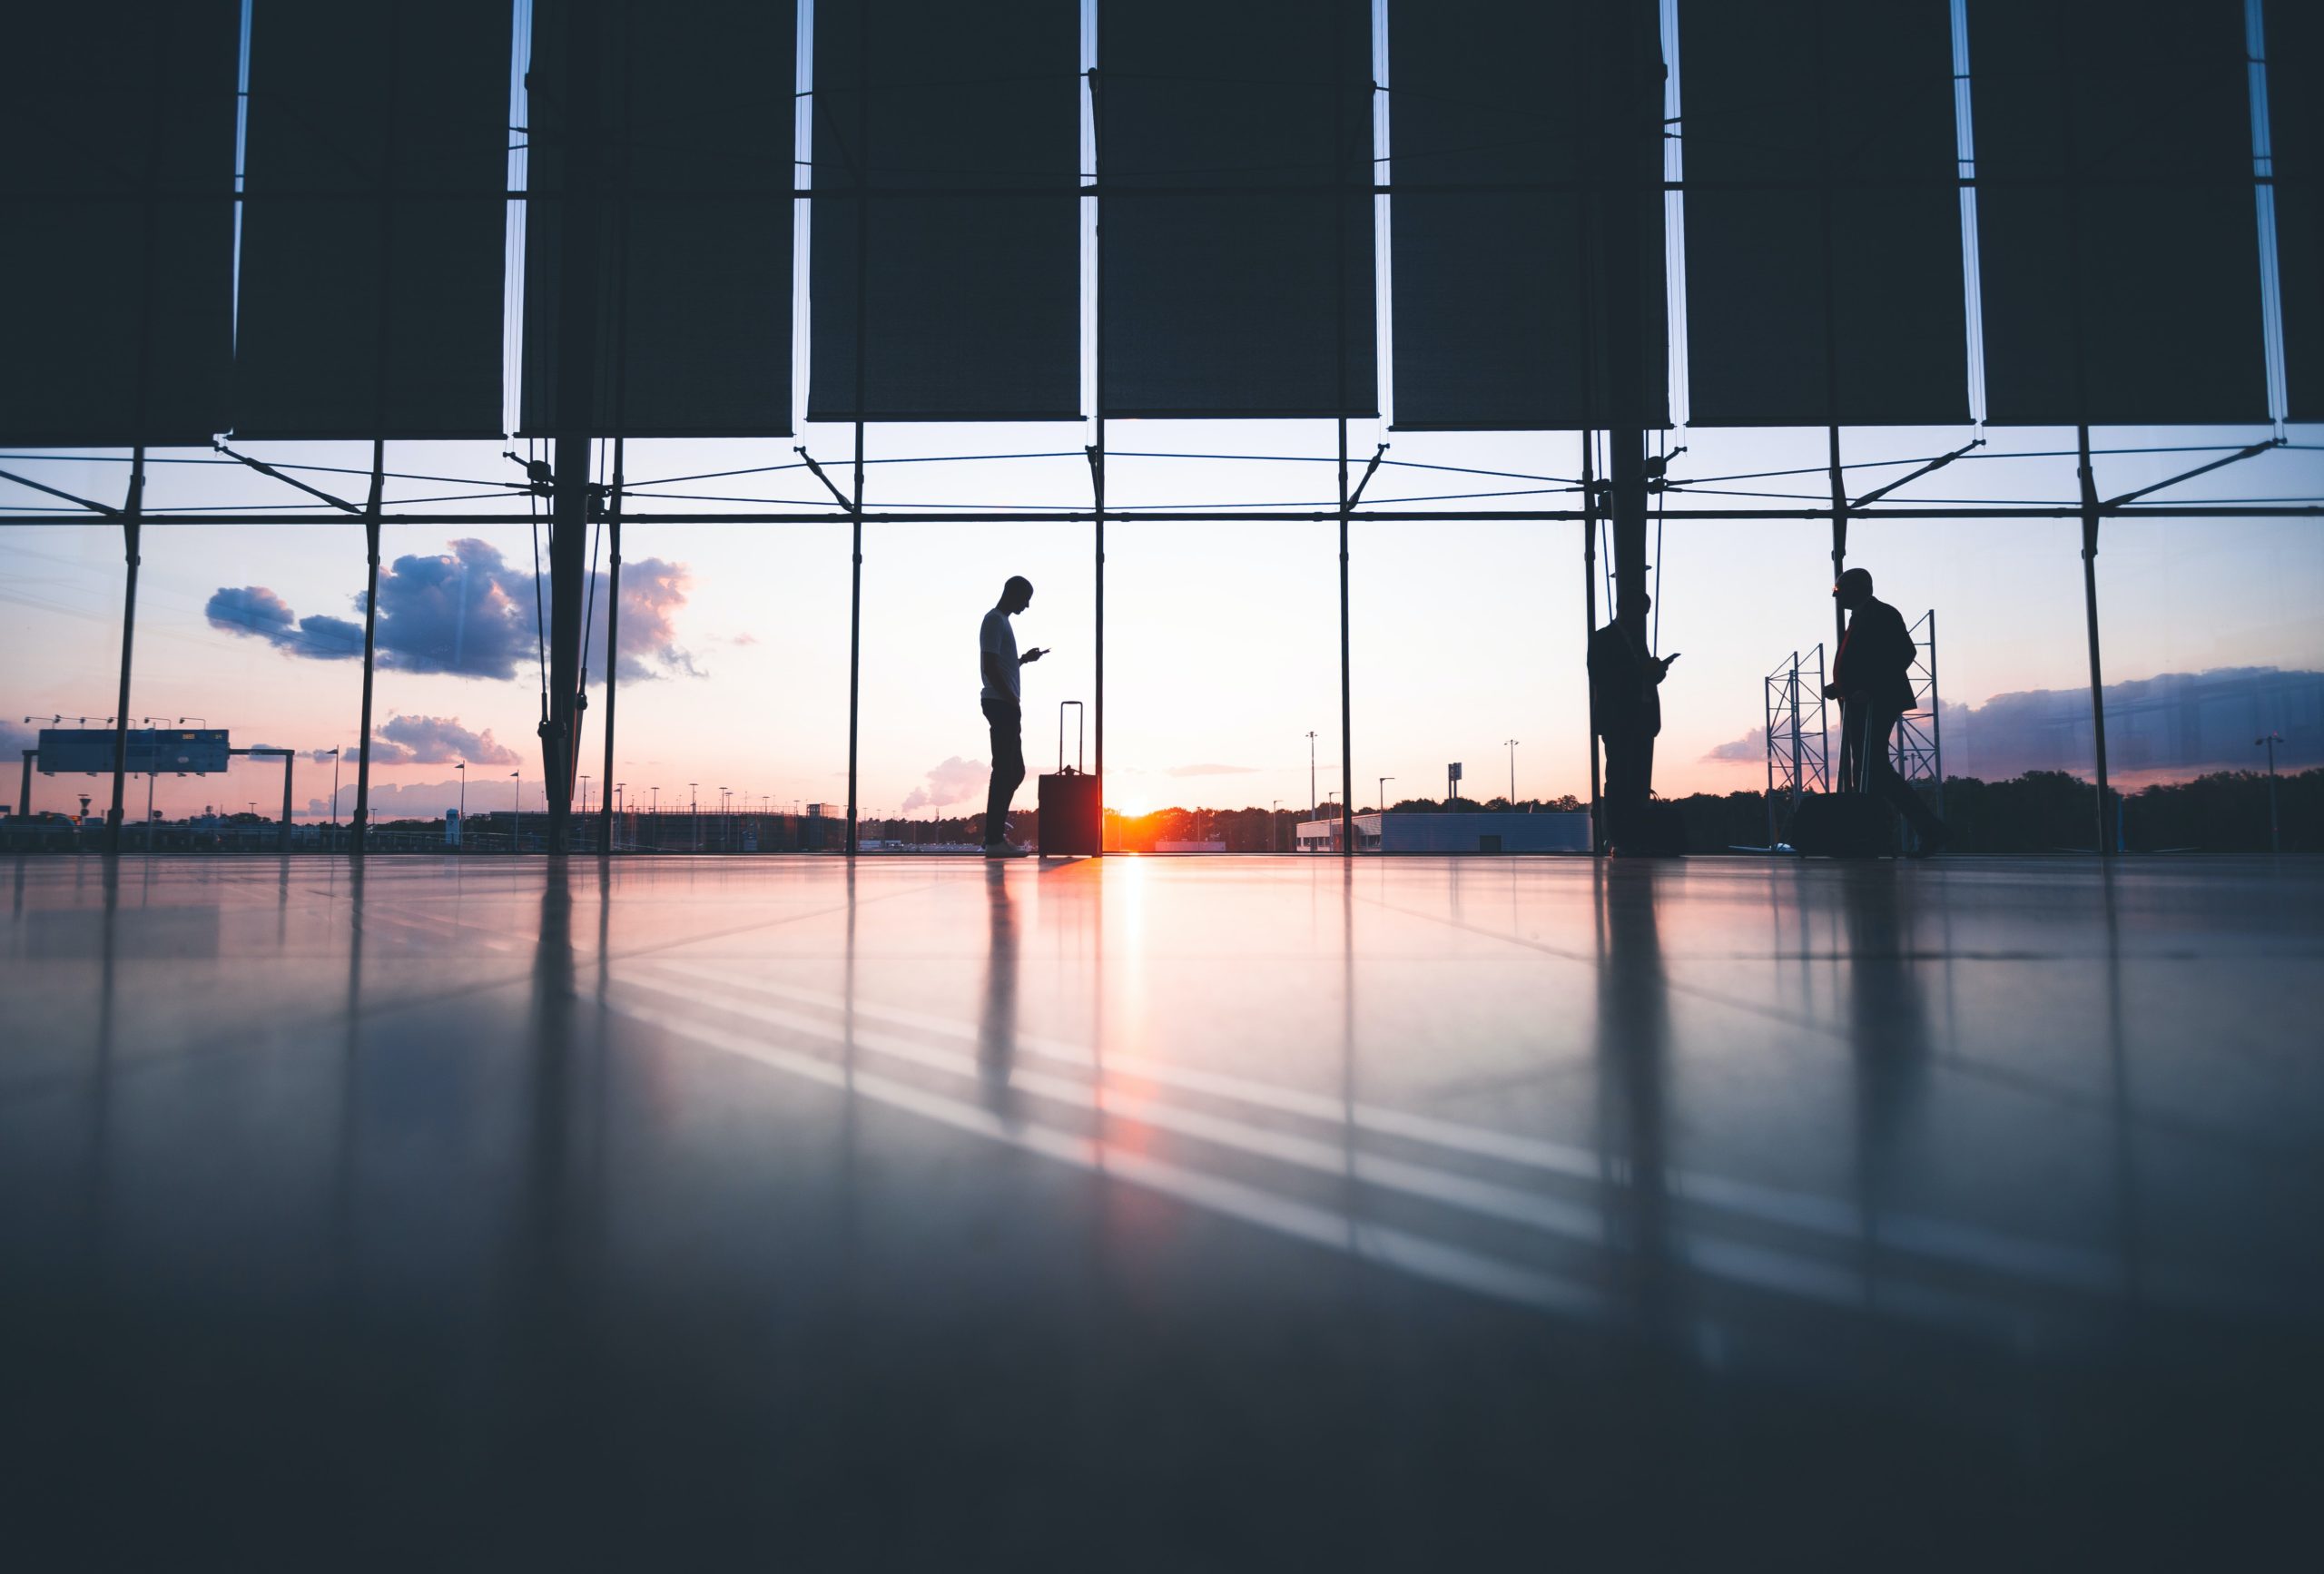 A wide shot of a view from an airport, the sun is setting on the horizon. A silhouette stands in the middle checking their phone.